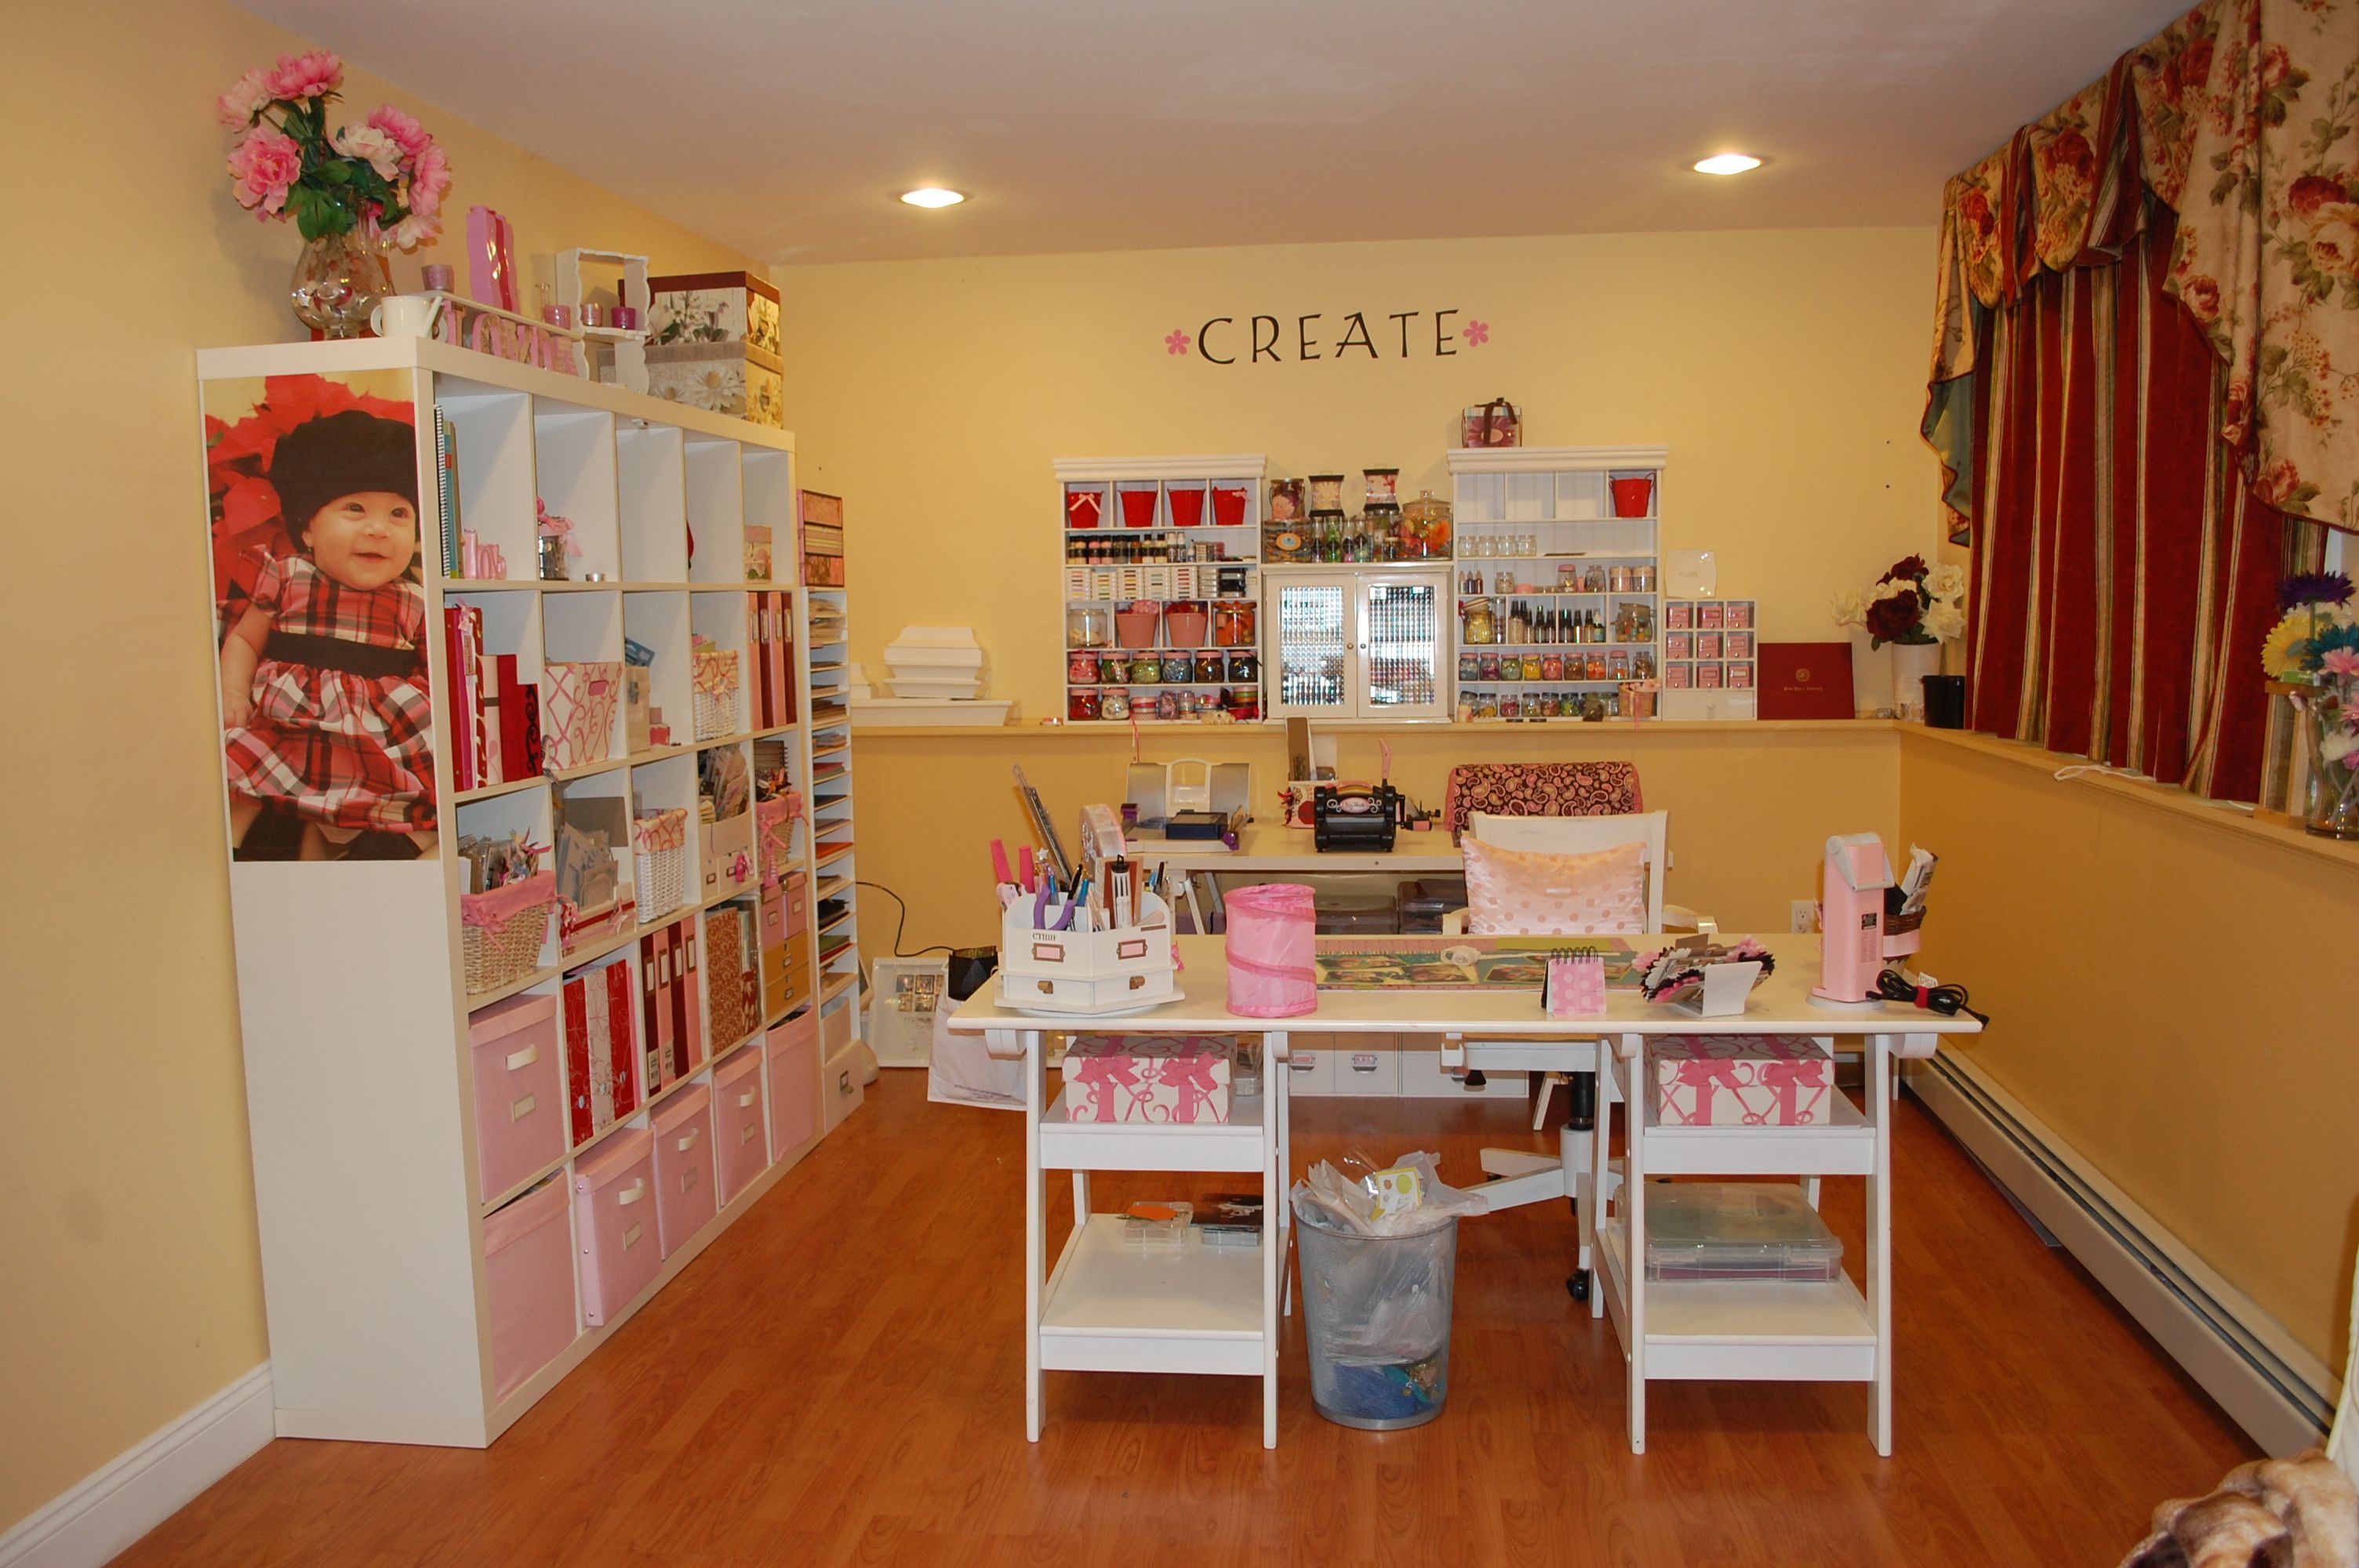 Craft Studio – The word on the back wall says it all. Come on in and CREATE in t